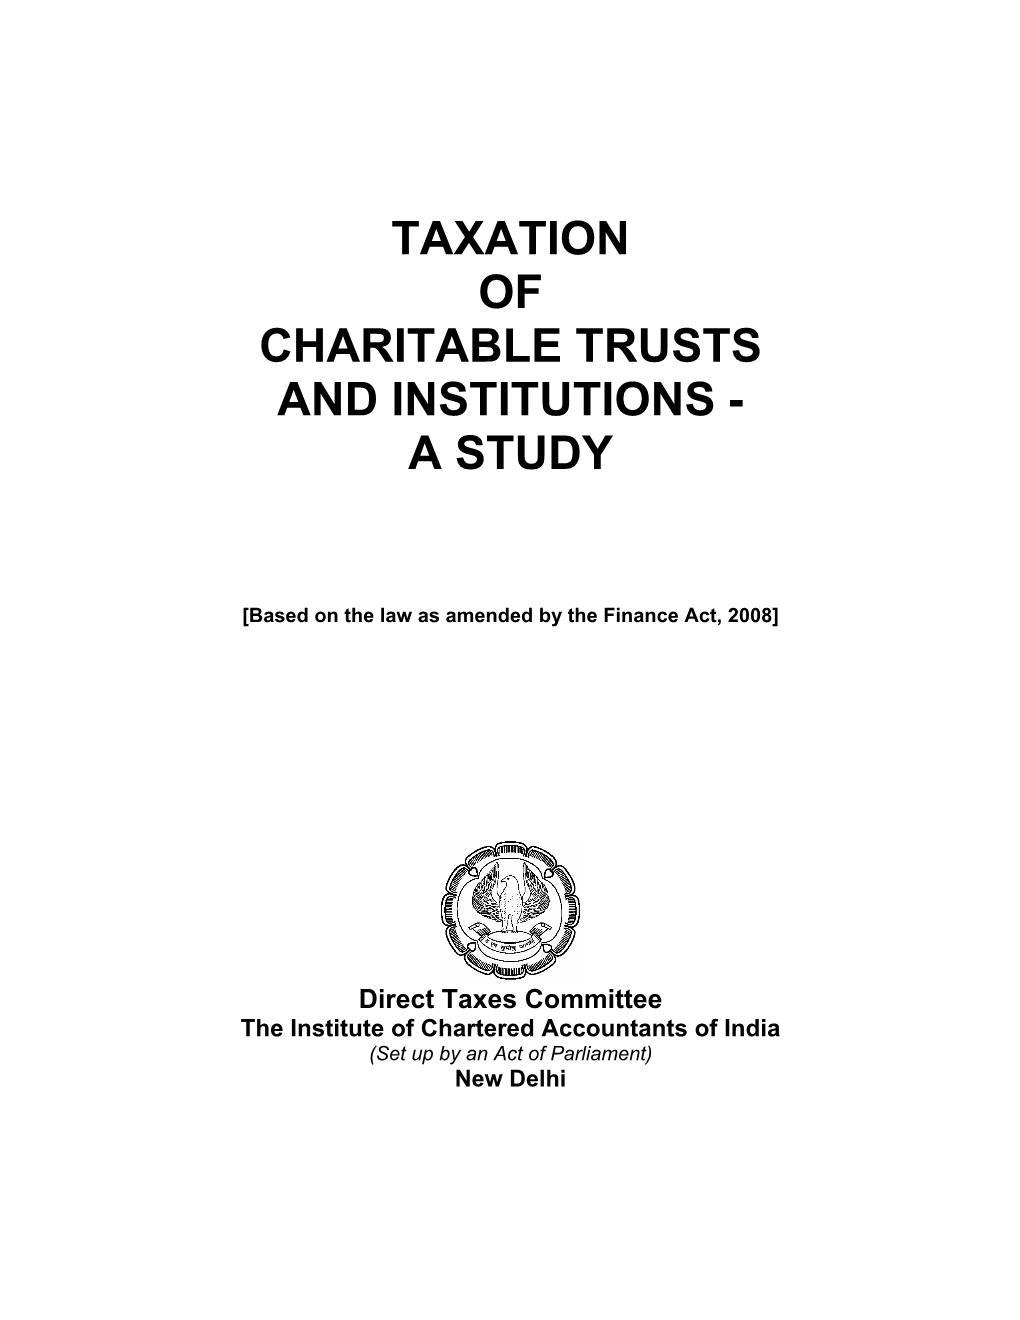 Taxation of Charitable Trusts and Institutions - a Study